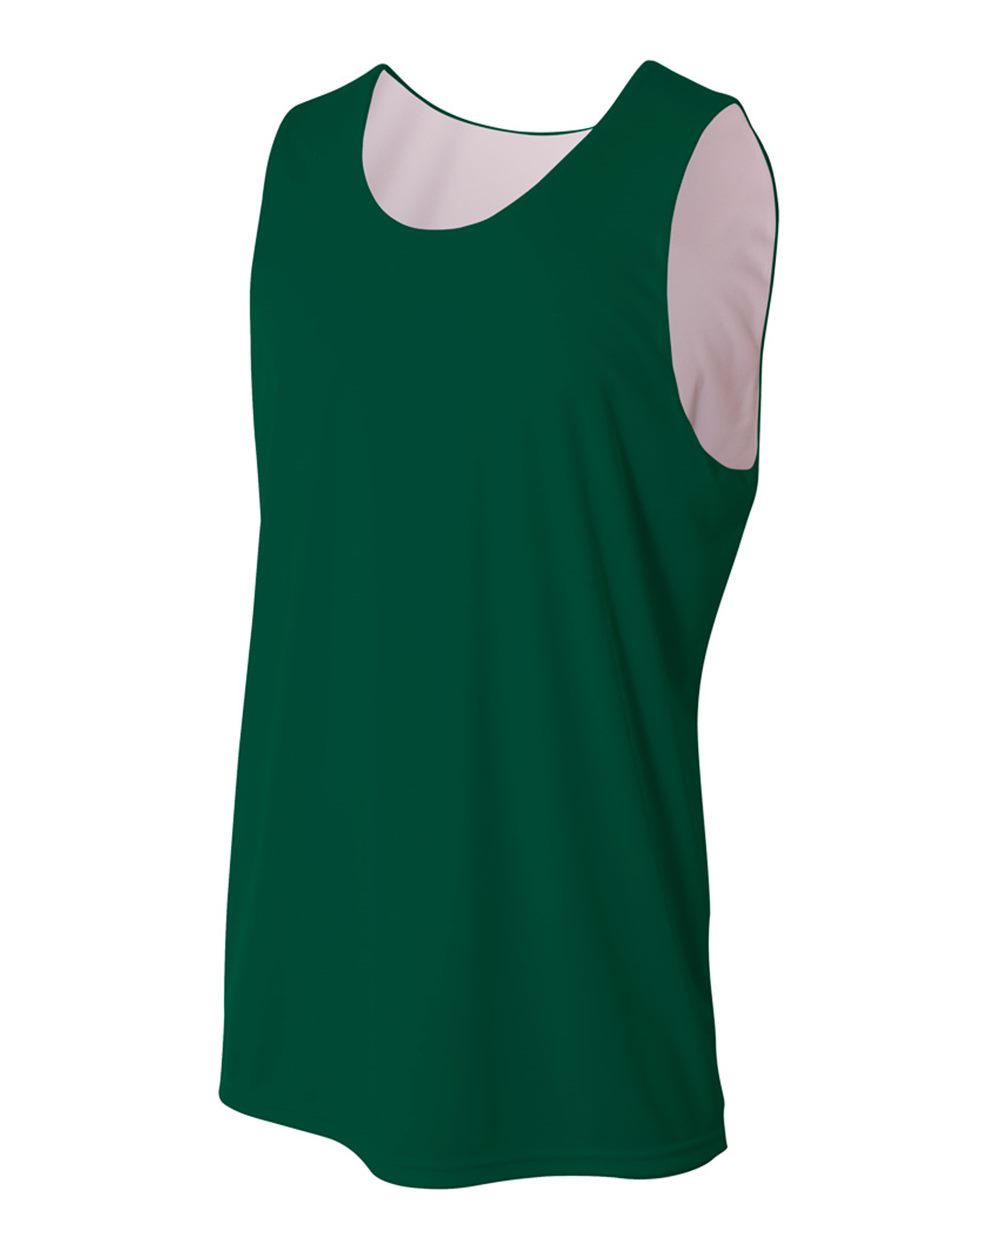 Reversible Dry-Fit Jump Jersey #800 